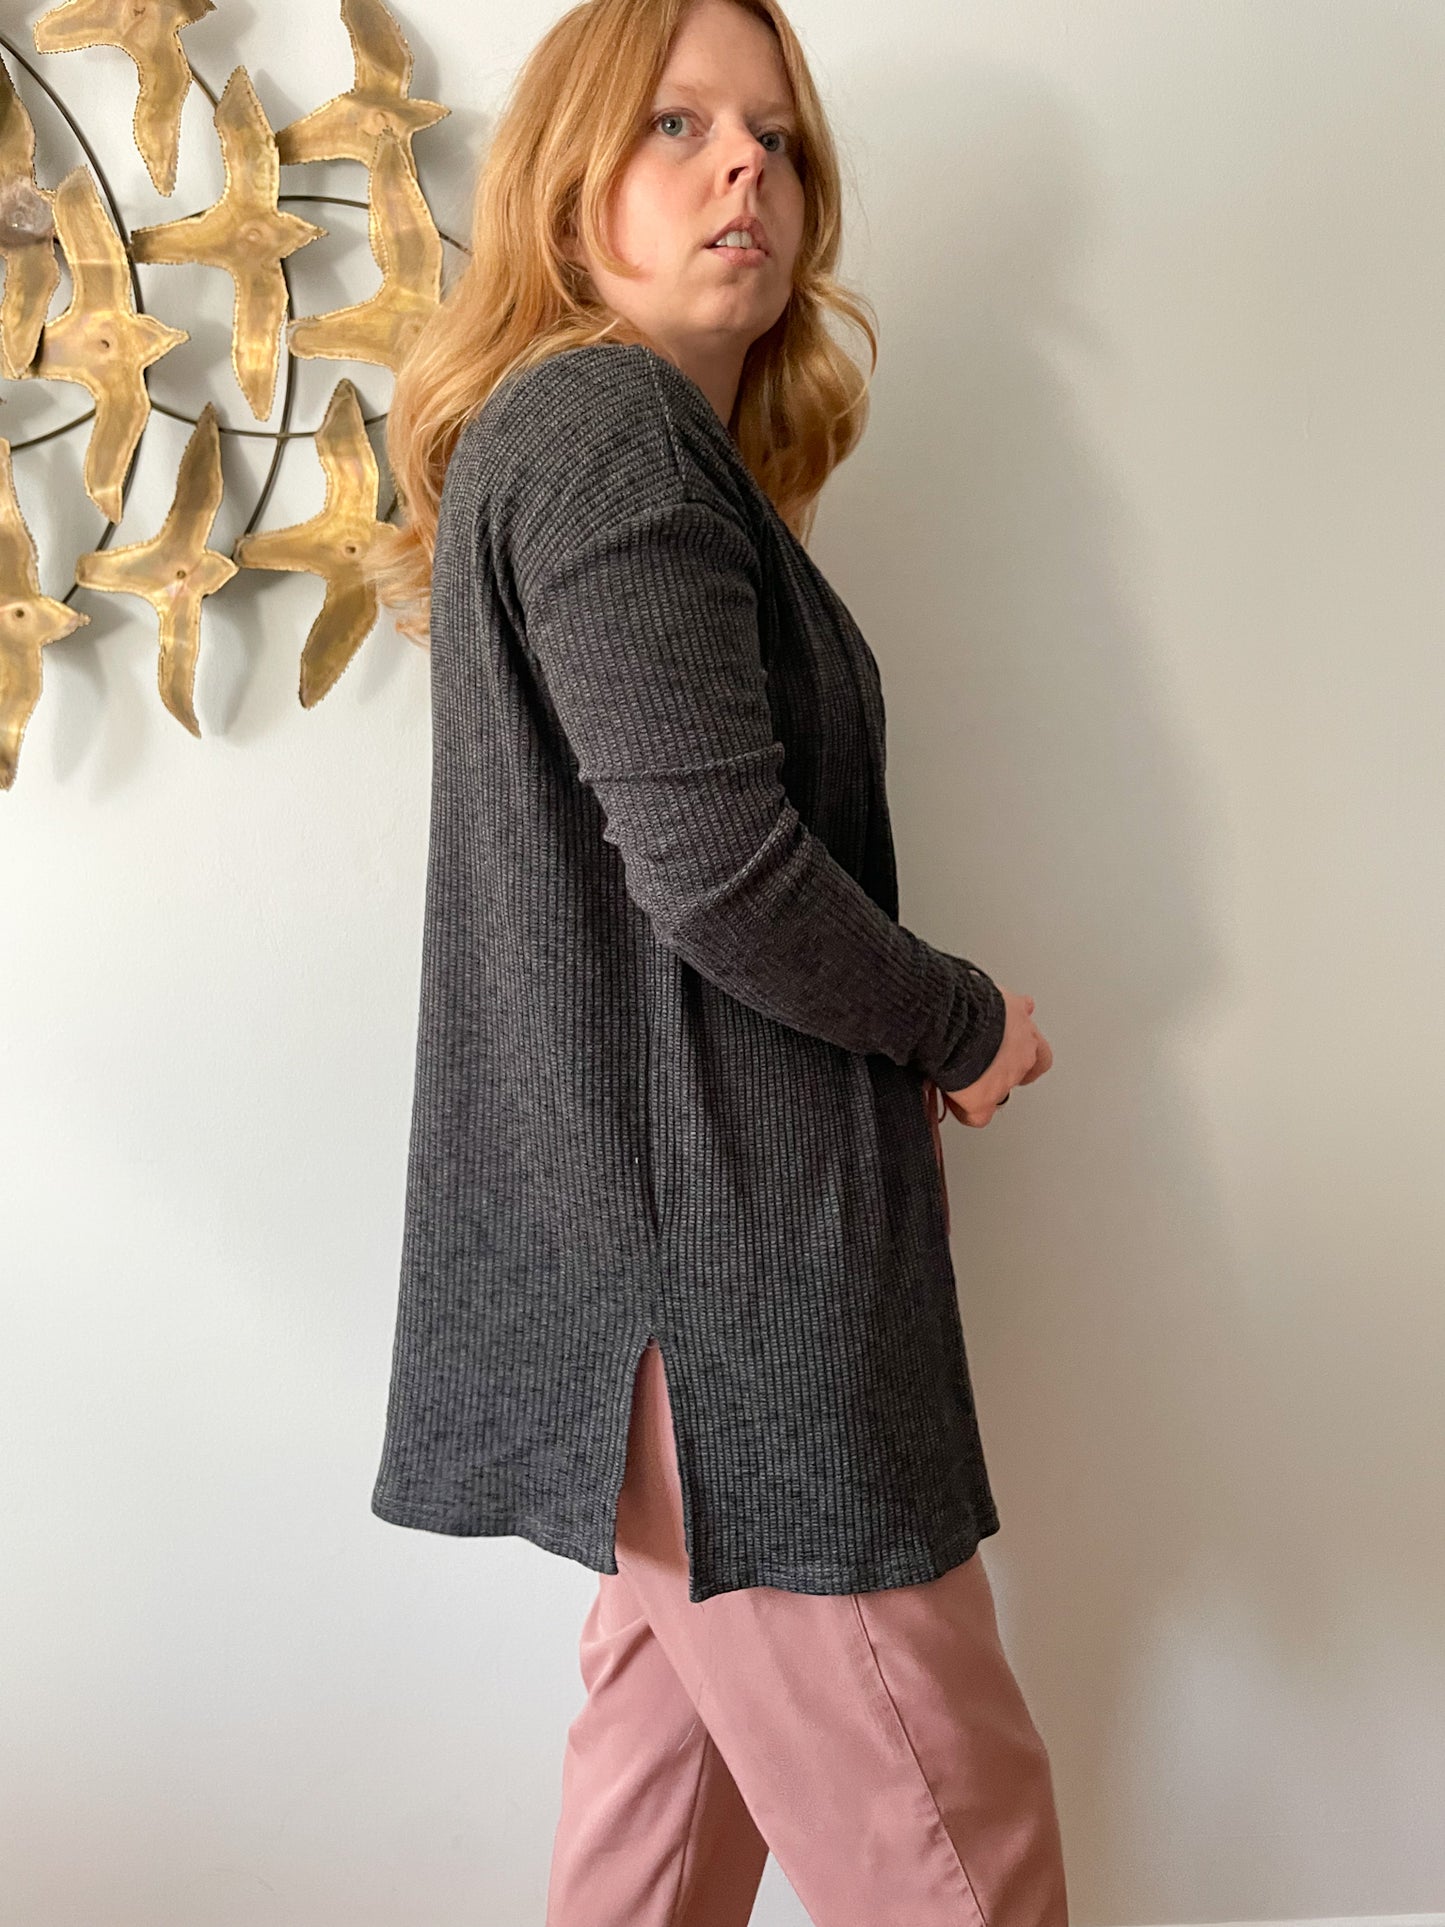 Charcoal Grey Relaxed Open Long Cardigan Sweater - S/M